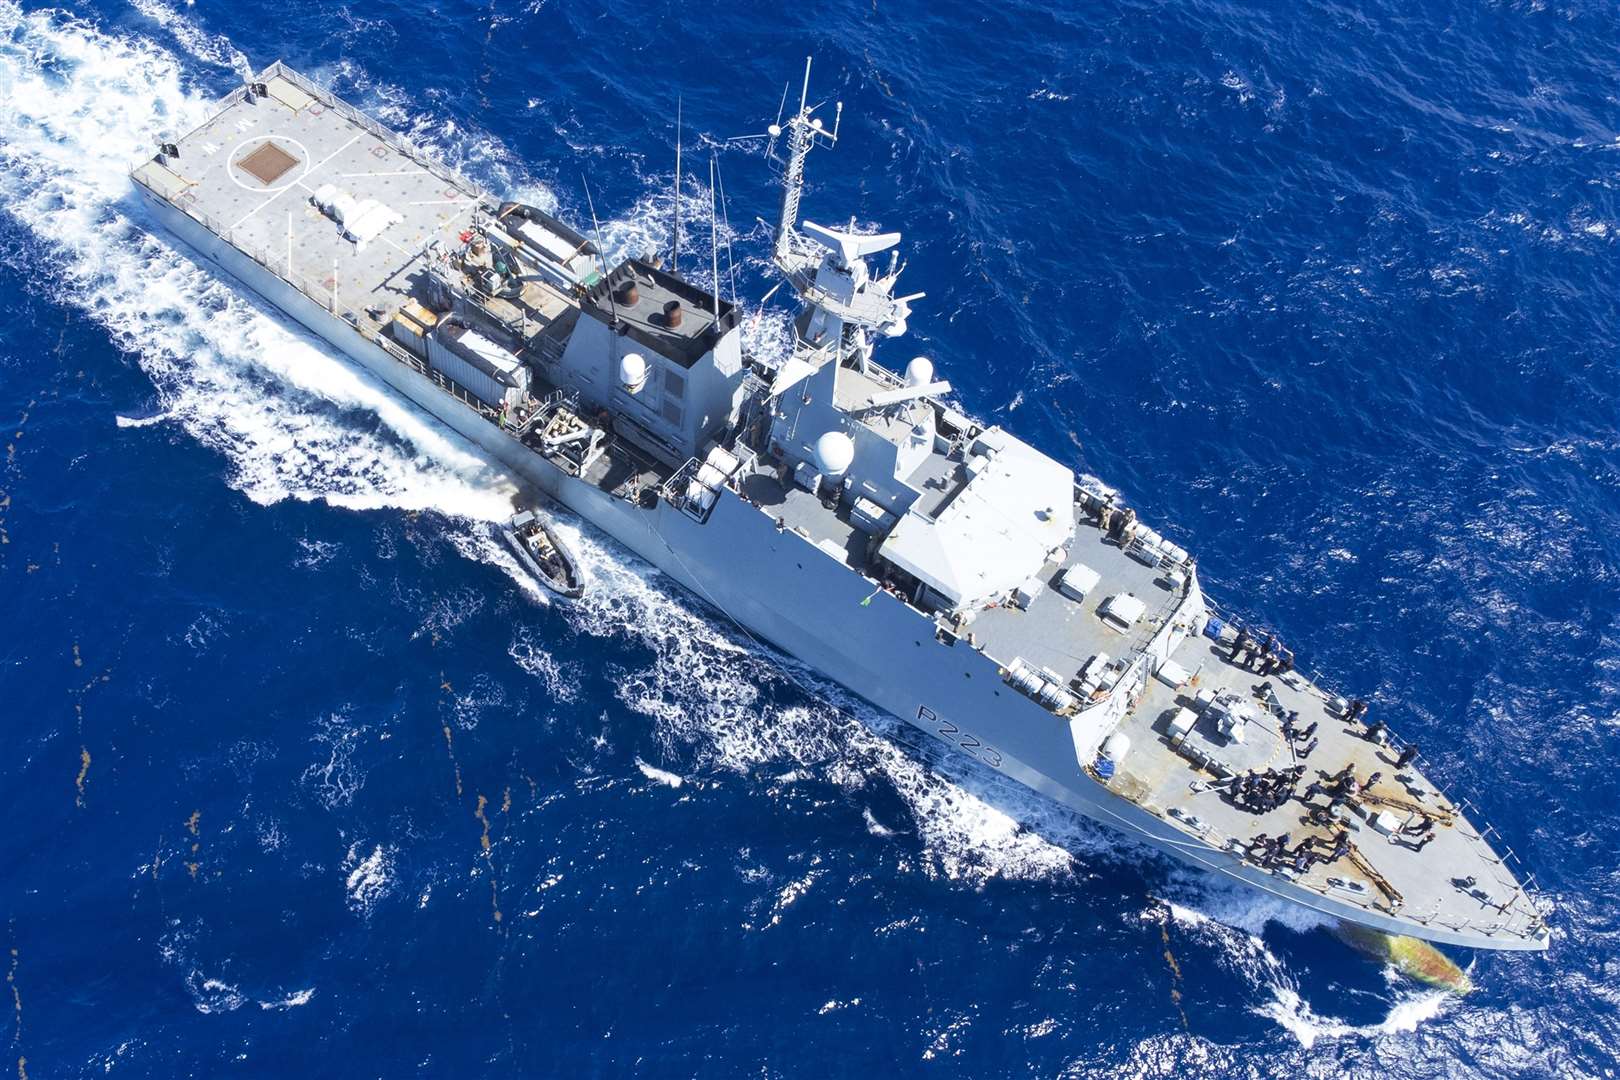 HMS Medway on patrol in the Caribbean. Photo: Royal Navy